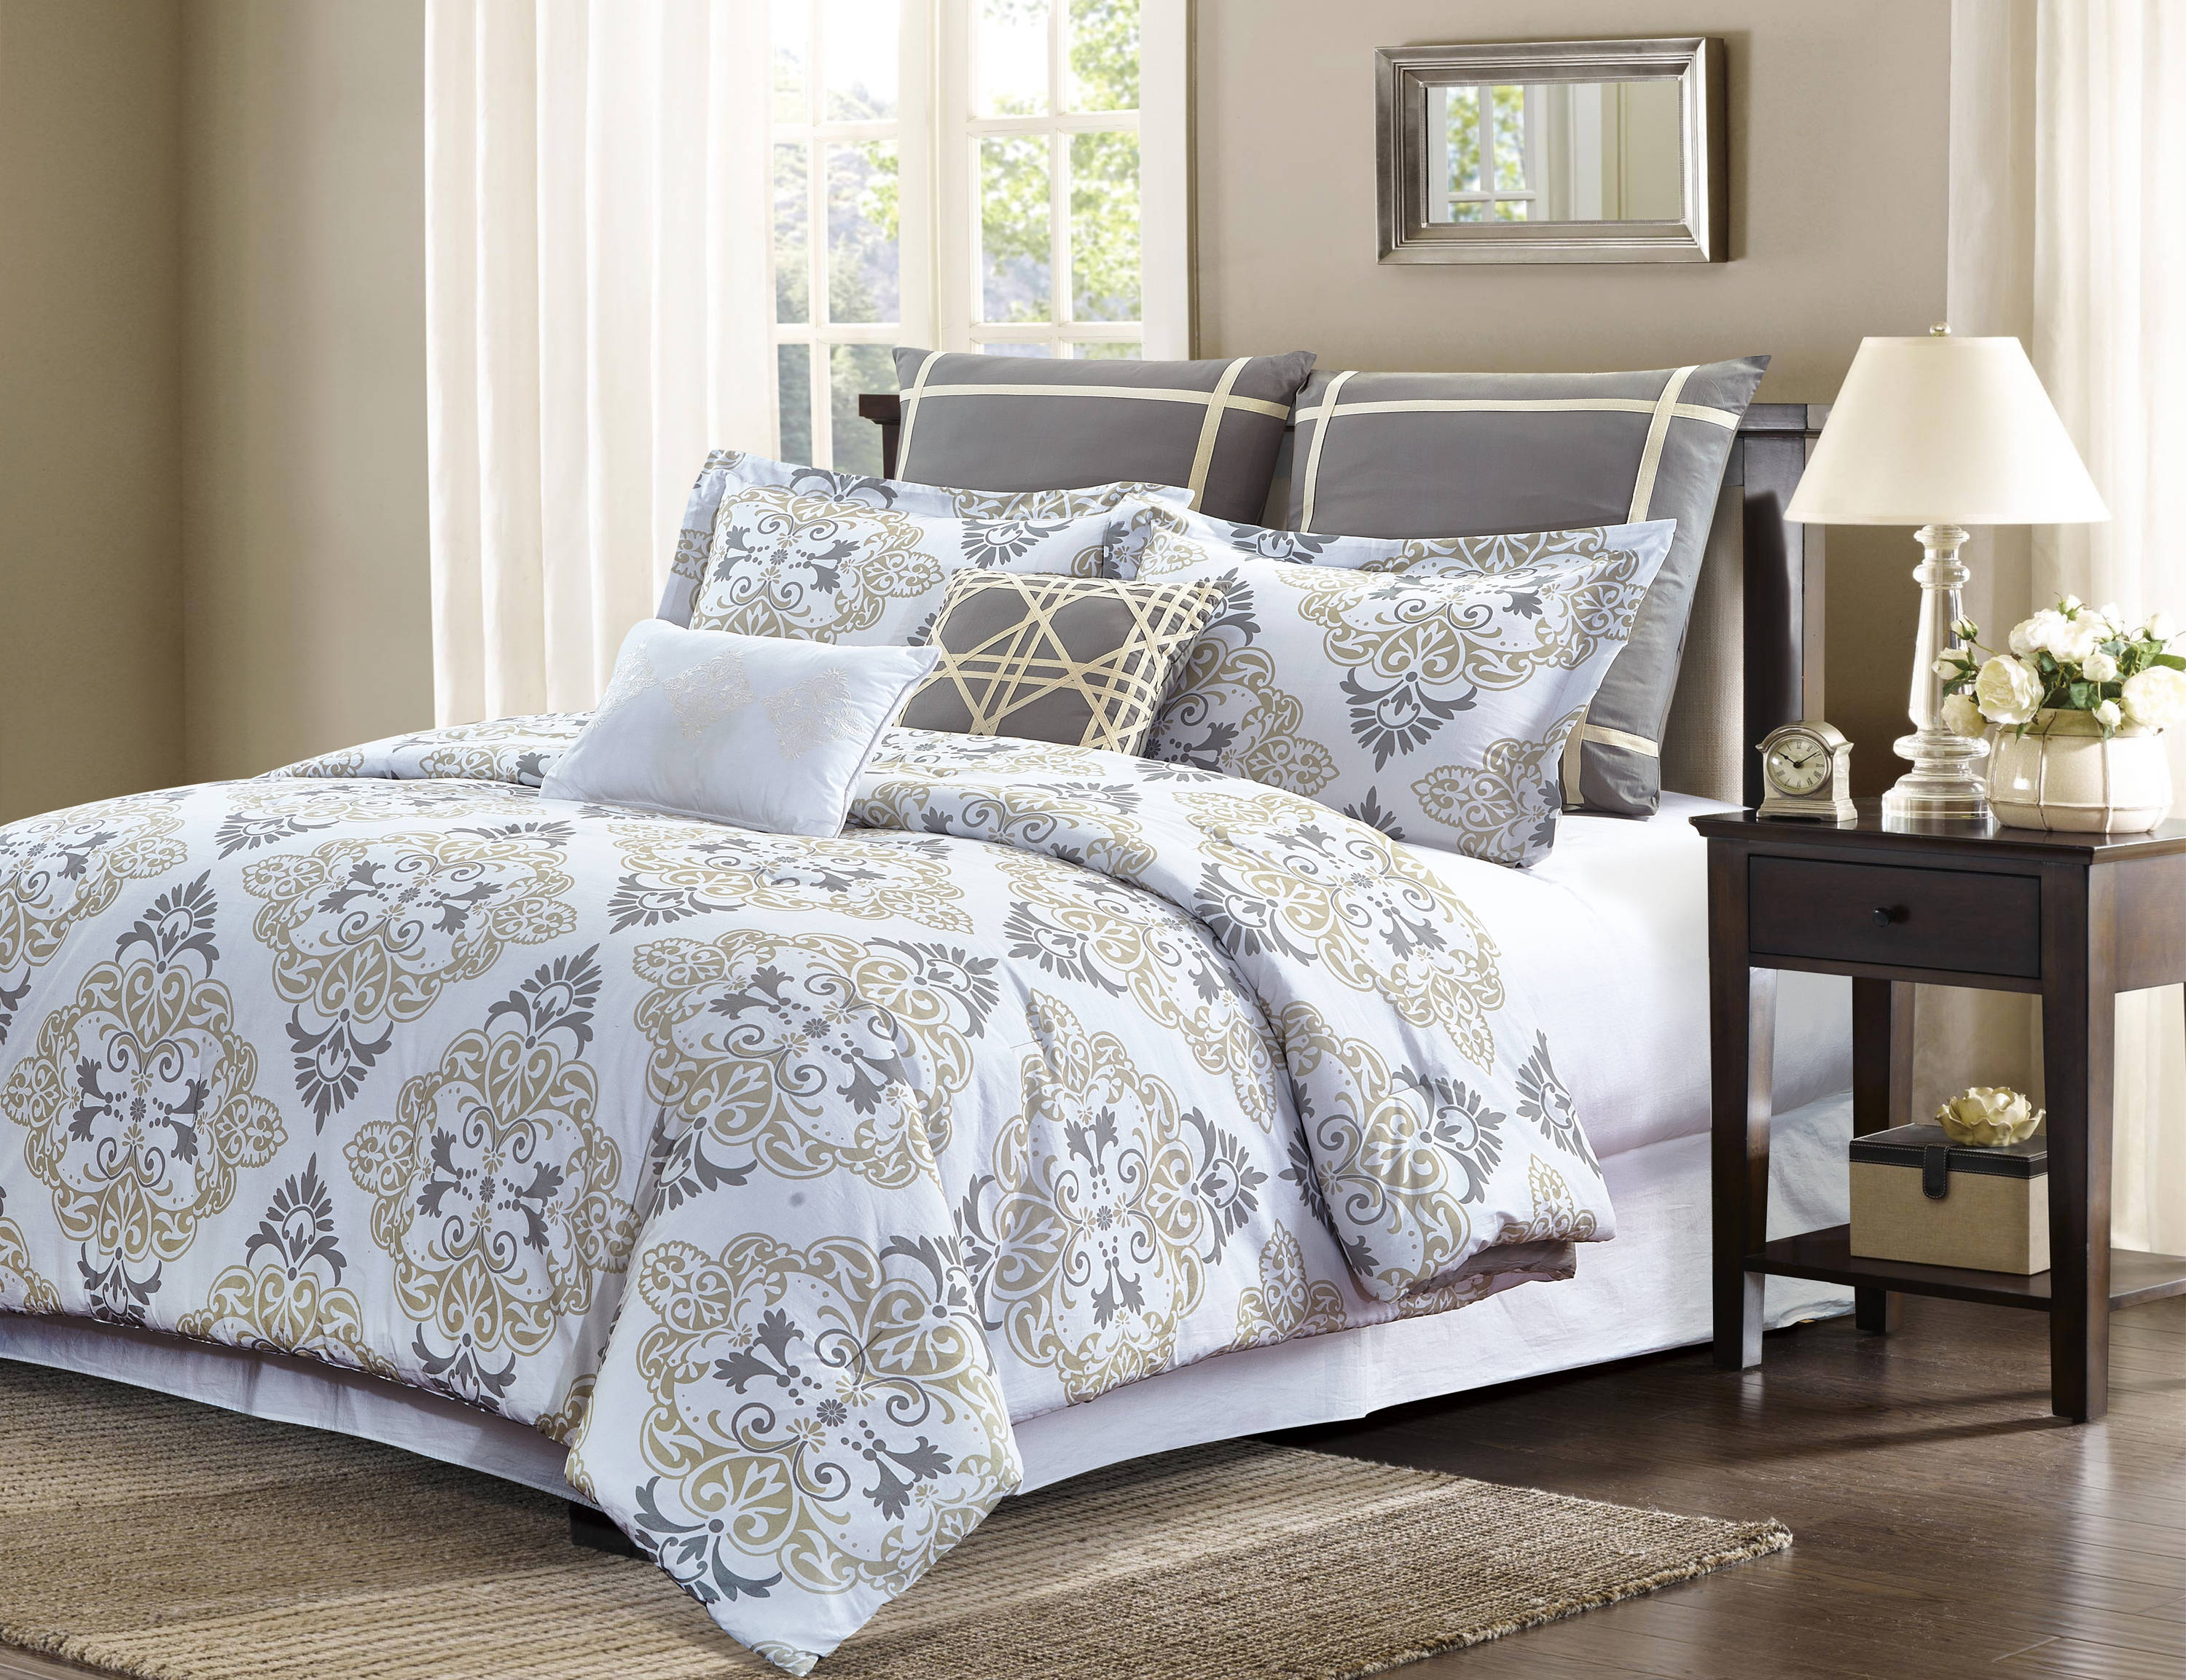 Men's Bedding Sets For Sale in King & Queen Size 2021 – Latest Bedding